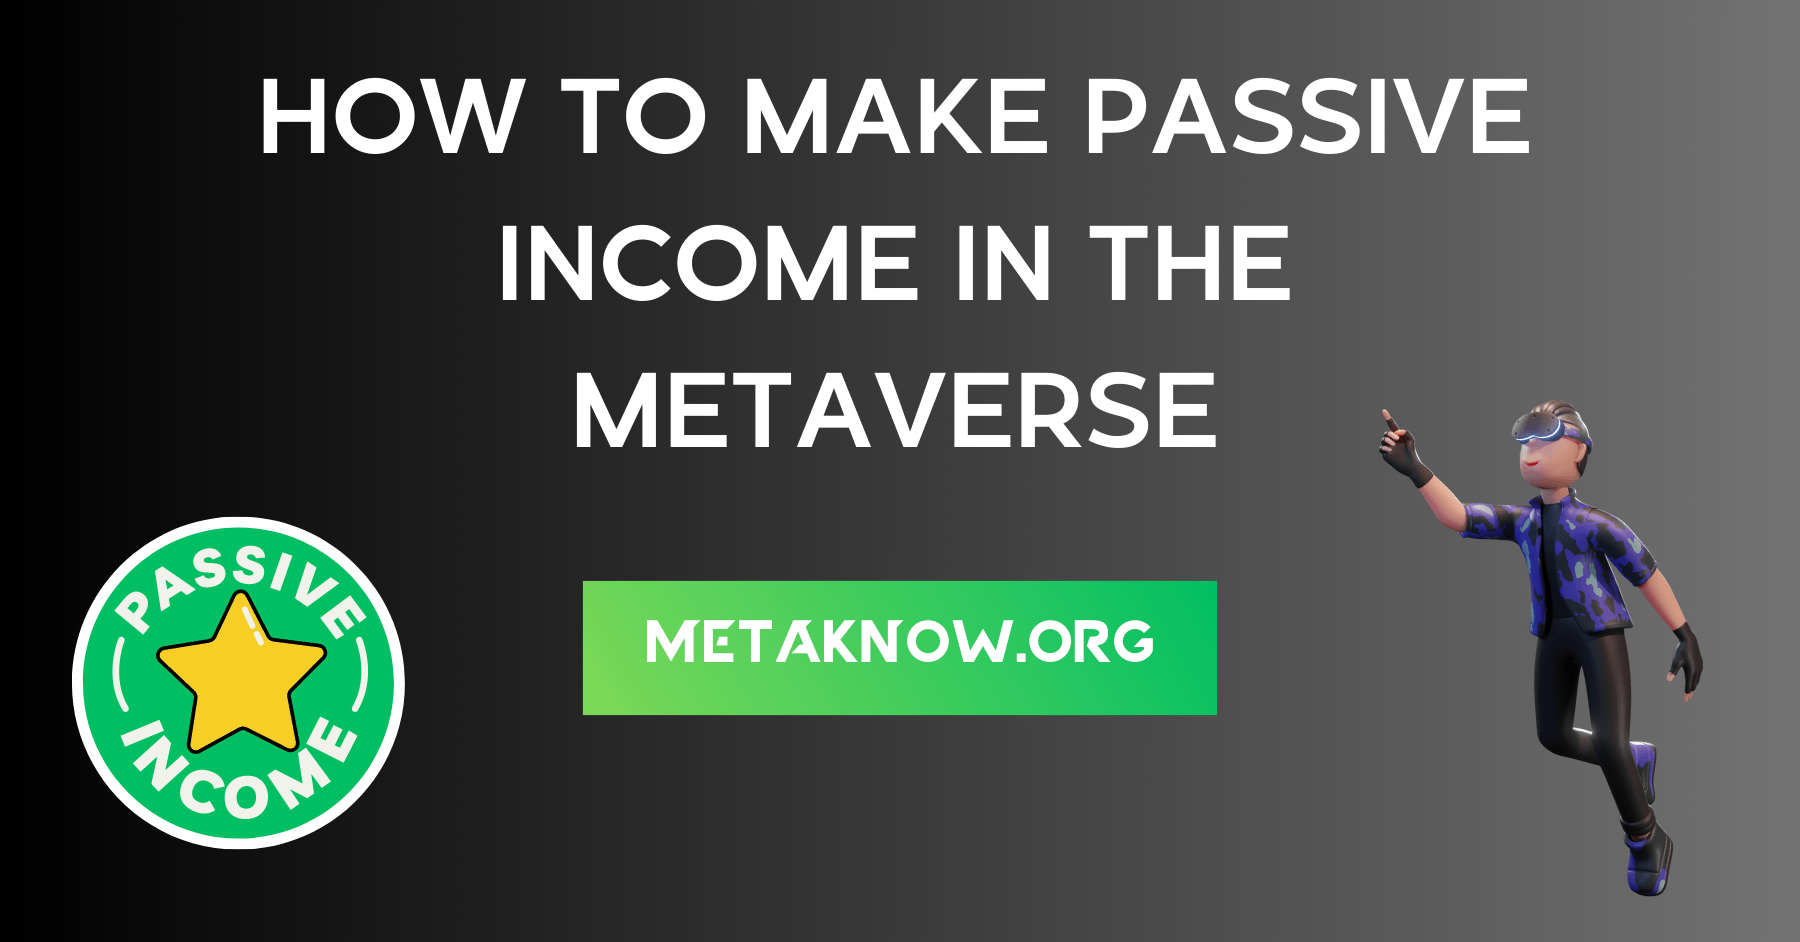 How to Make Passive Income in the Metaverse